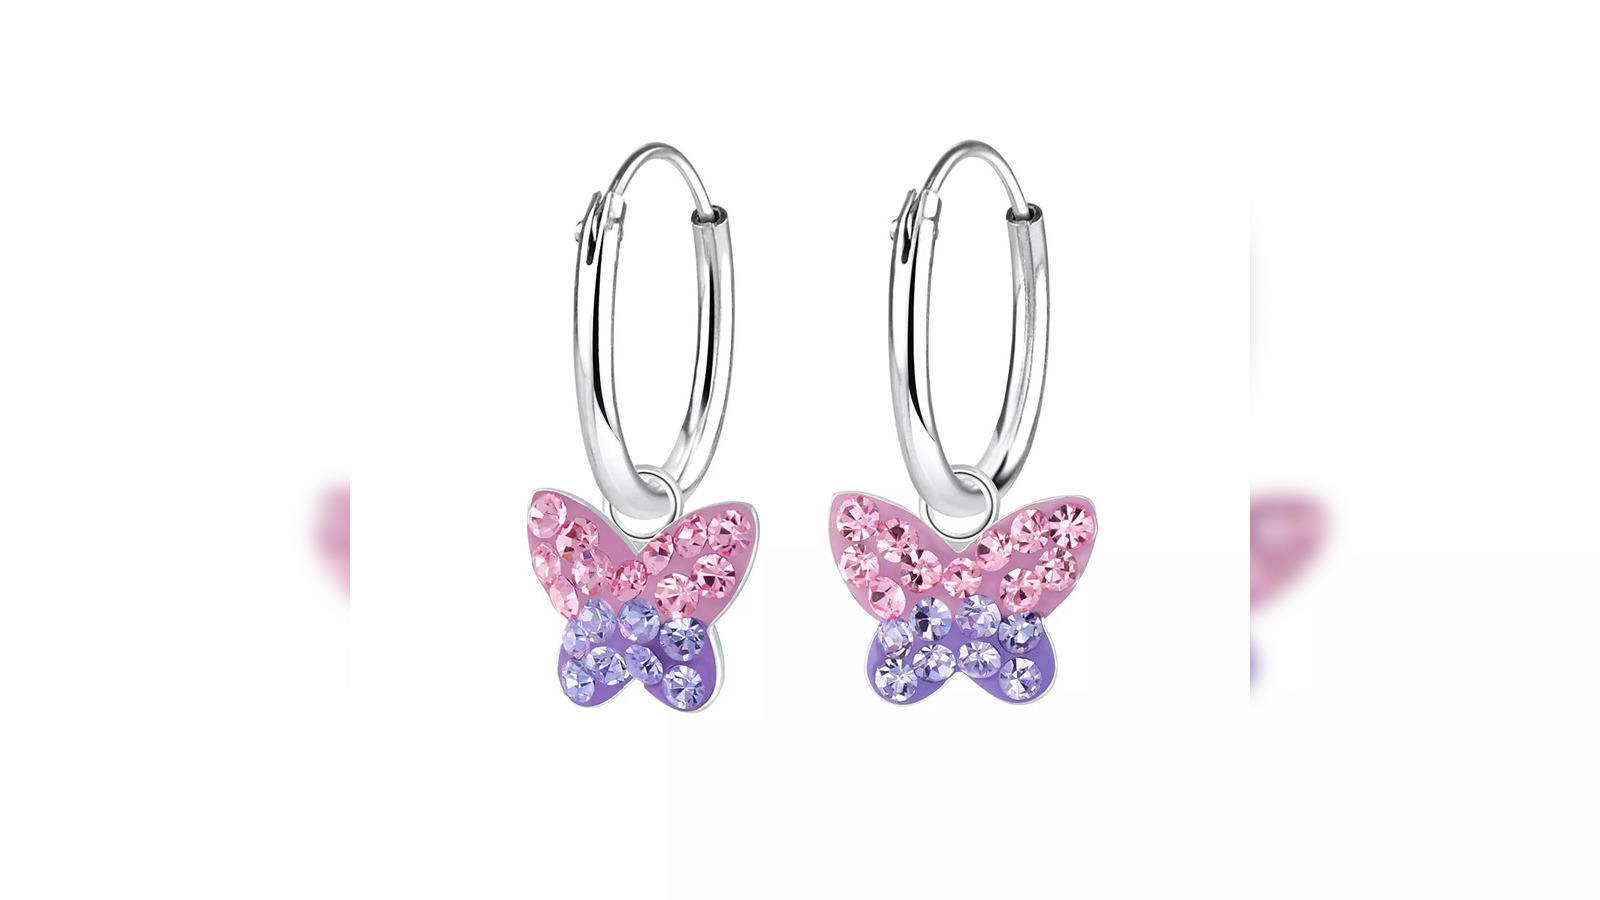 How to choose the best earrings for children | Molly Brown London